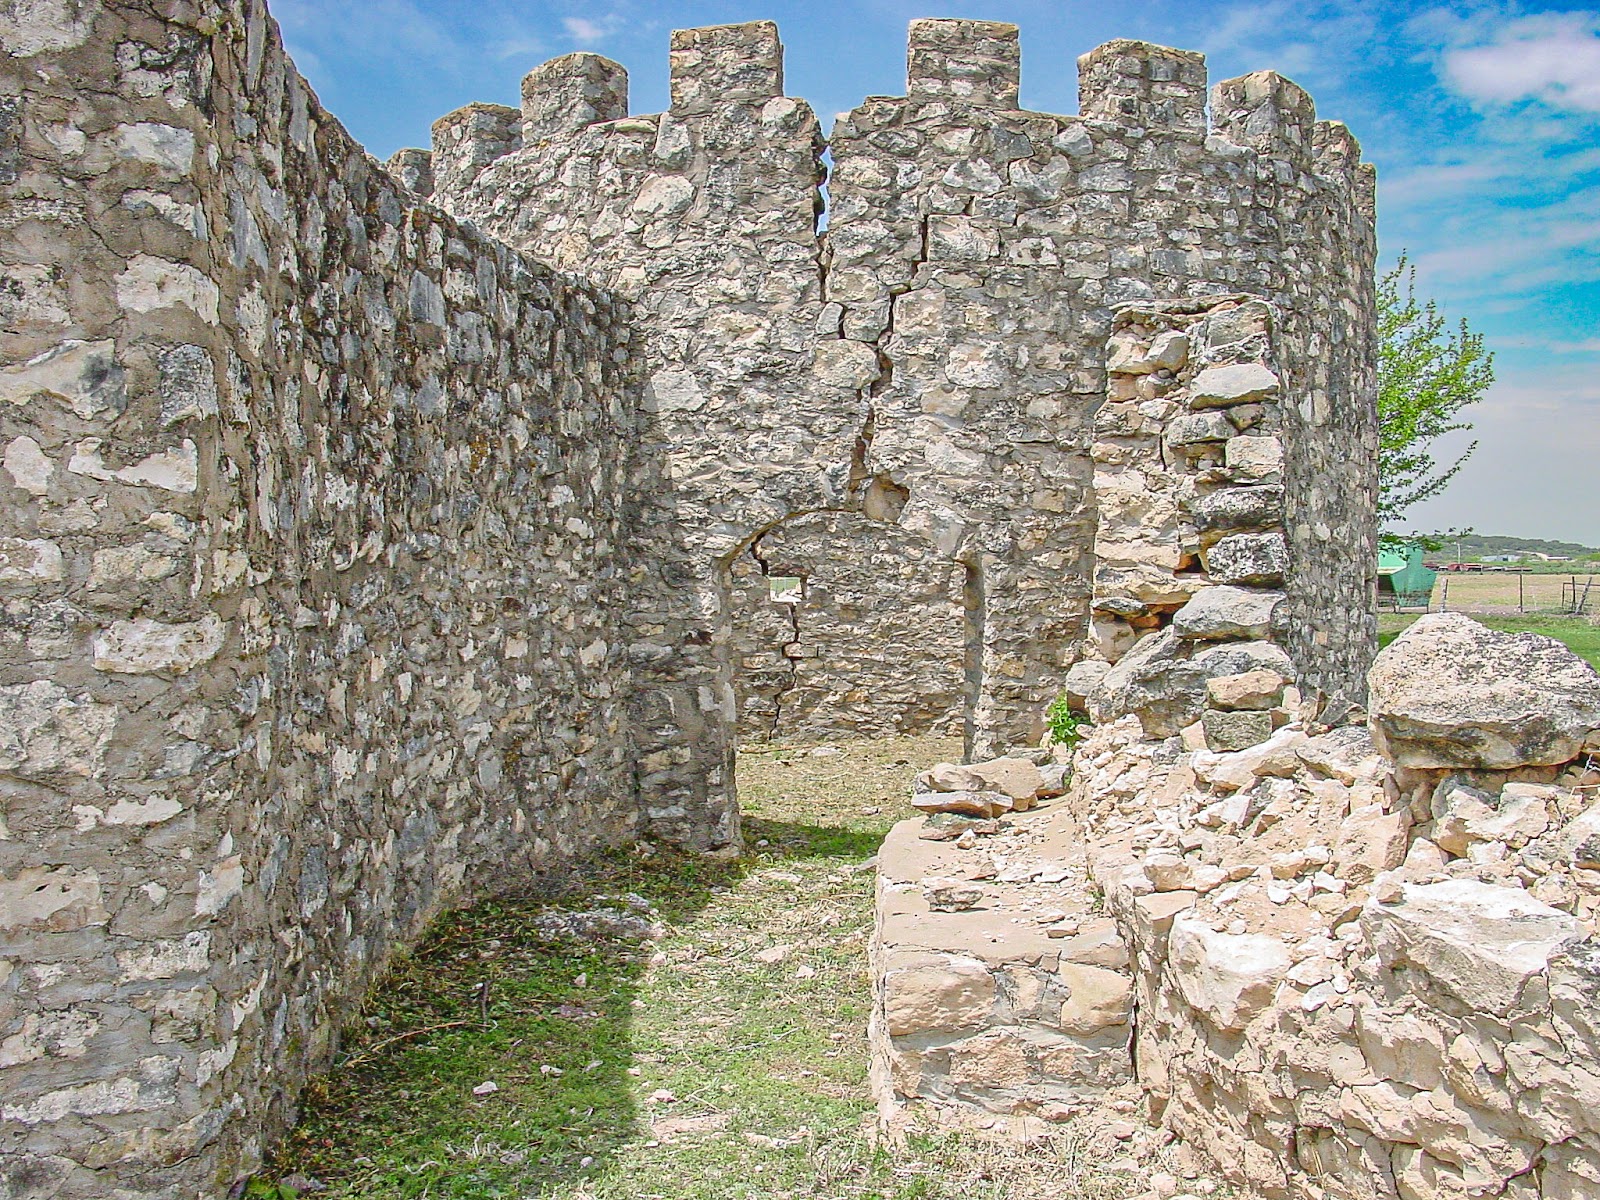 The ruins of an old fieldstone structure with an cylindrical turret, large crack in the wall and many scattered rocks.